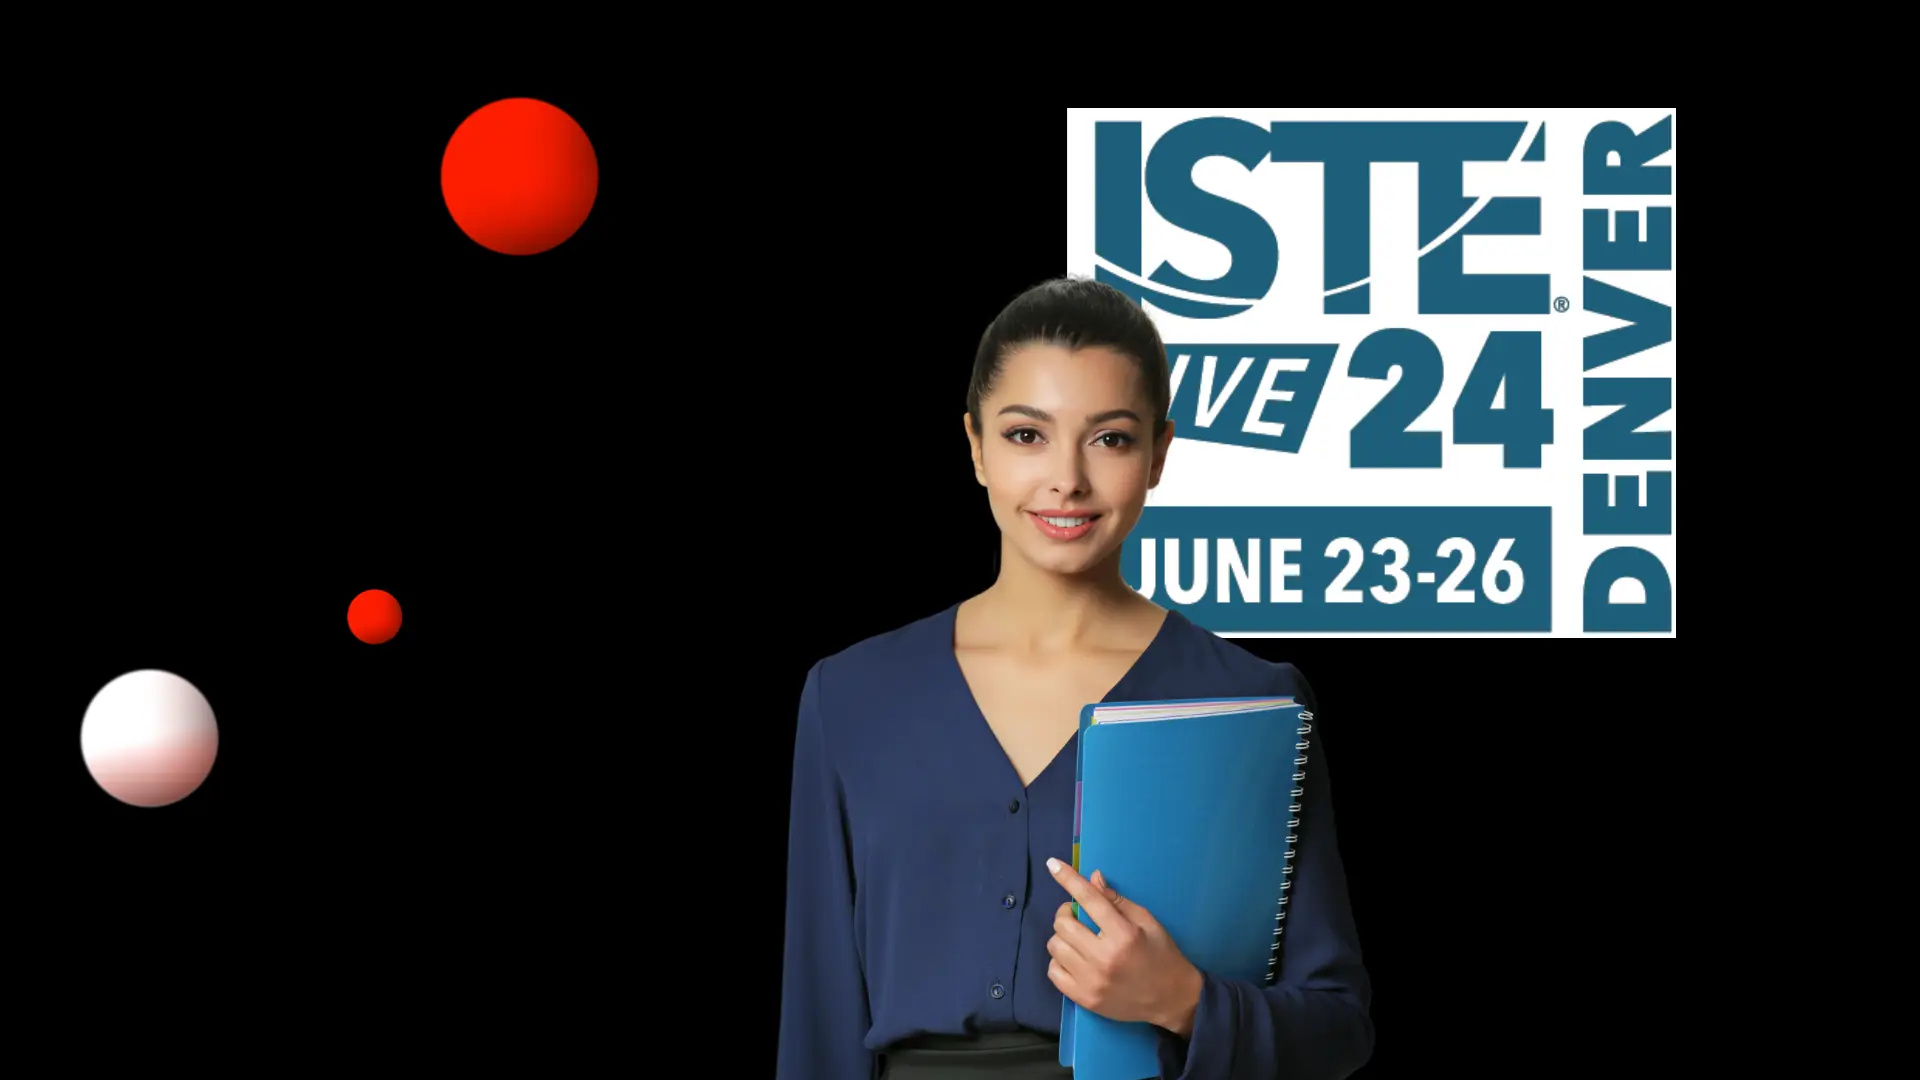 Teachers Guide to ISTE Live'24